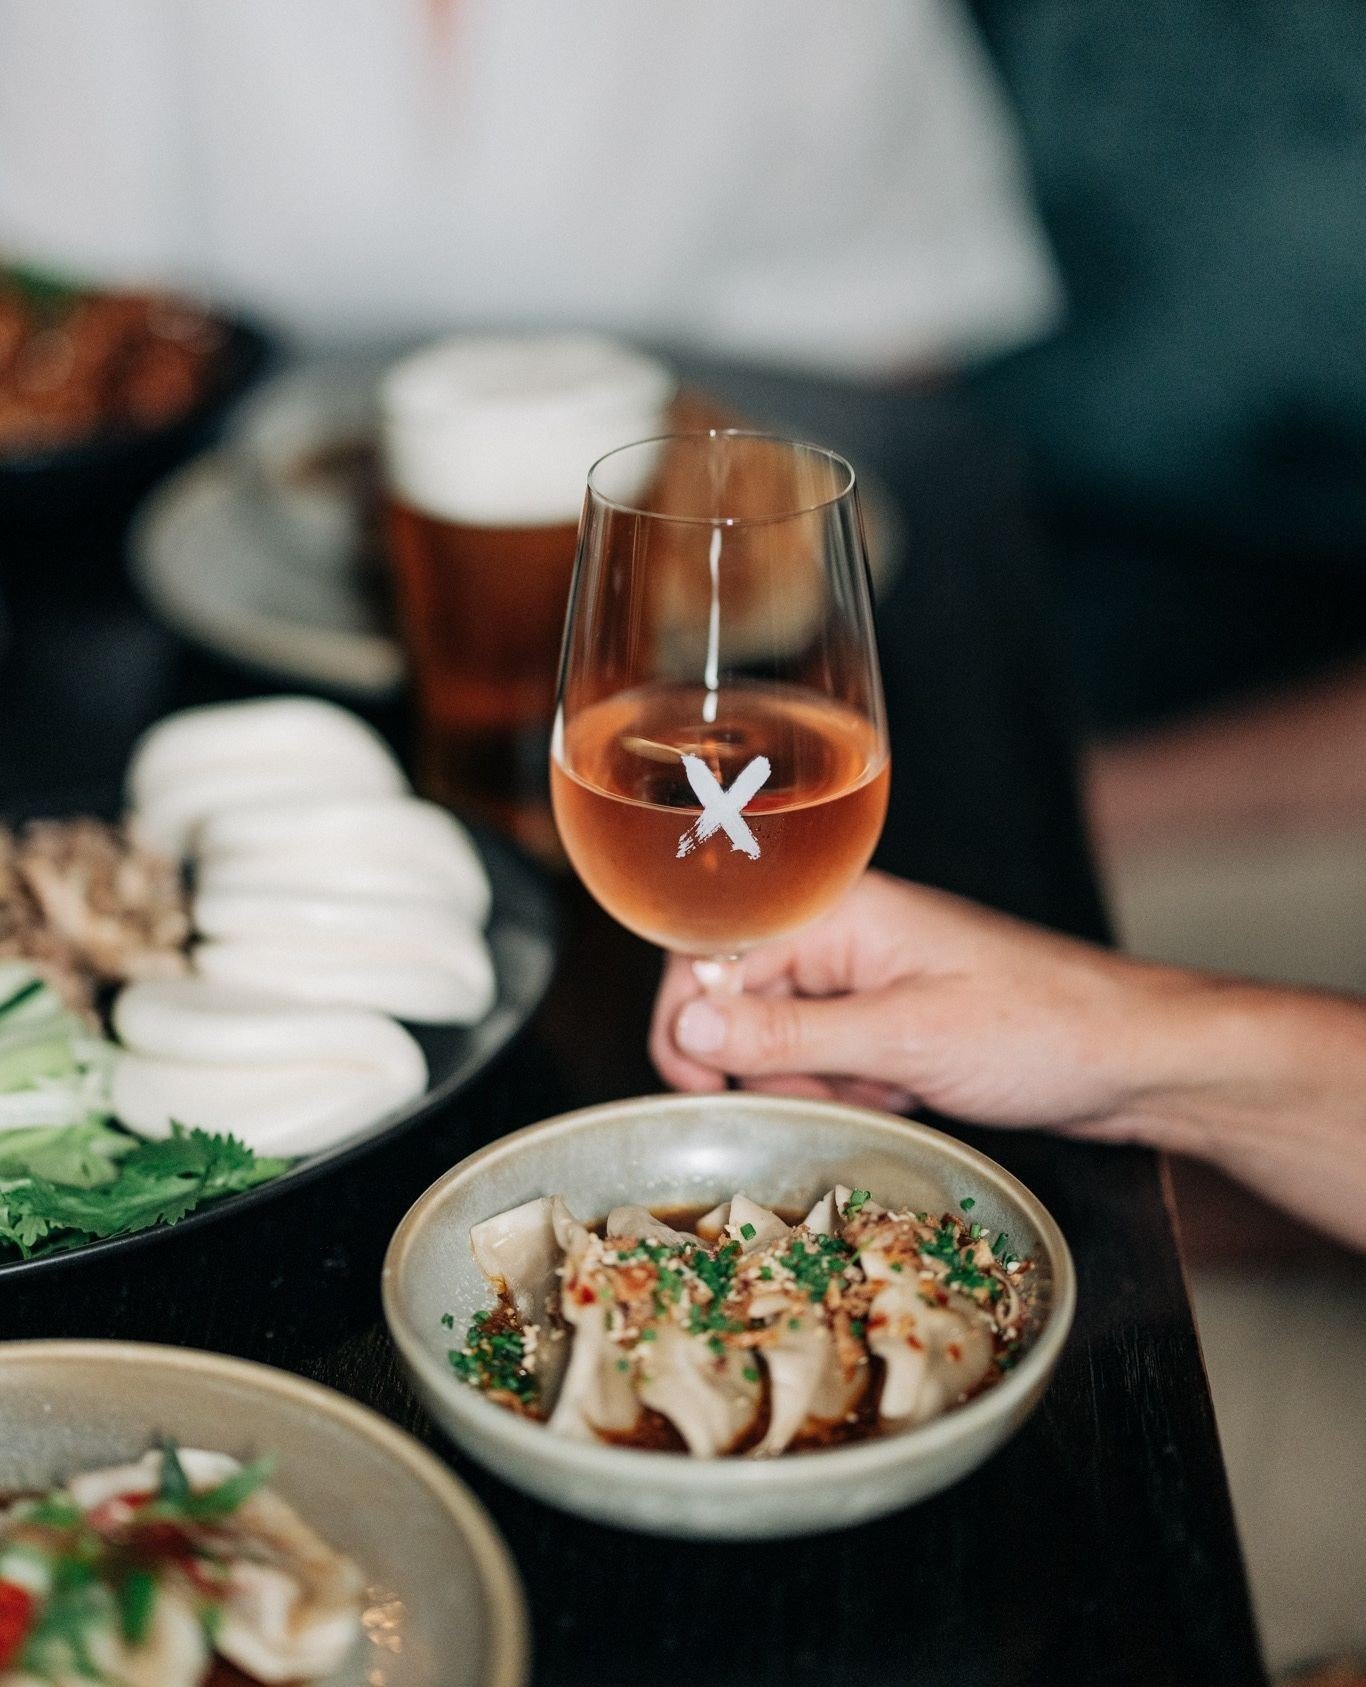 Looking for the perfect spot to unwind after work? Join us and unwind with friends over delicious bites and refreshing drinks! 🍻🥟 #gingermegsx